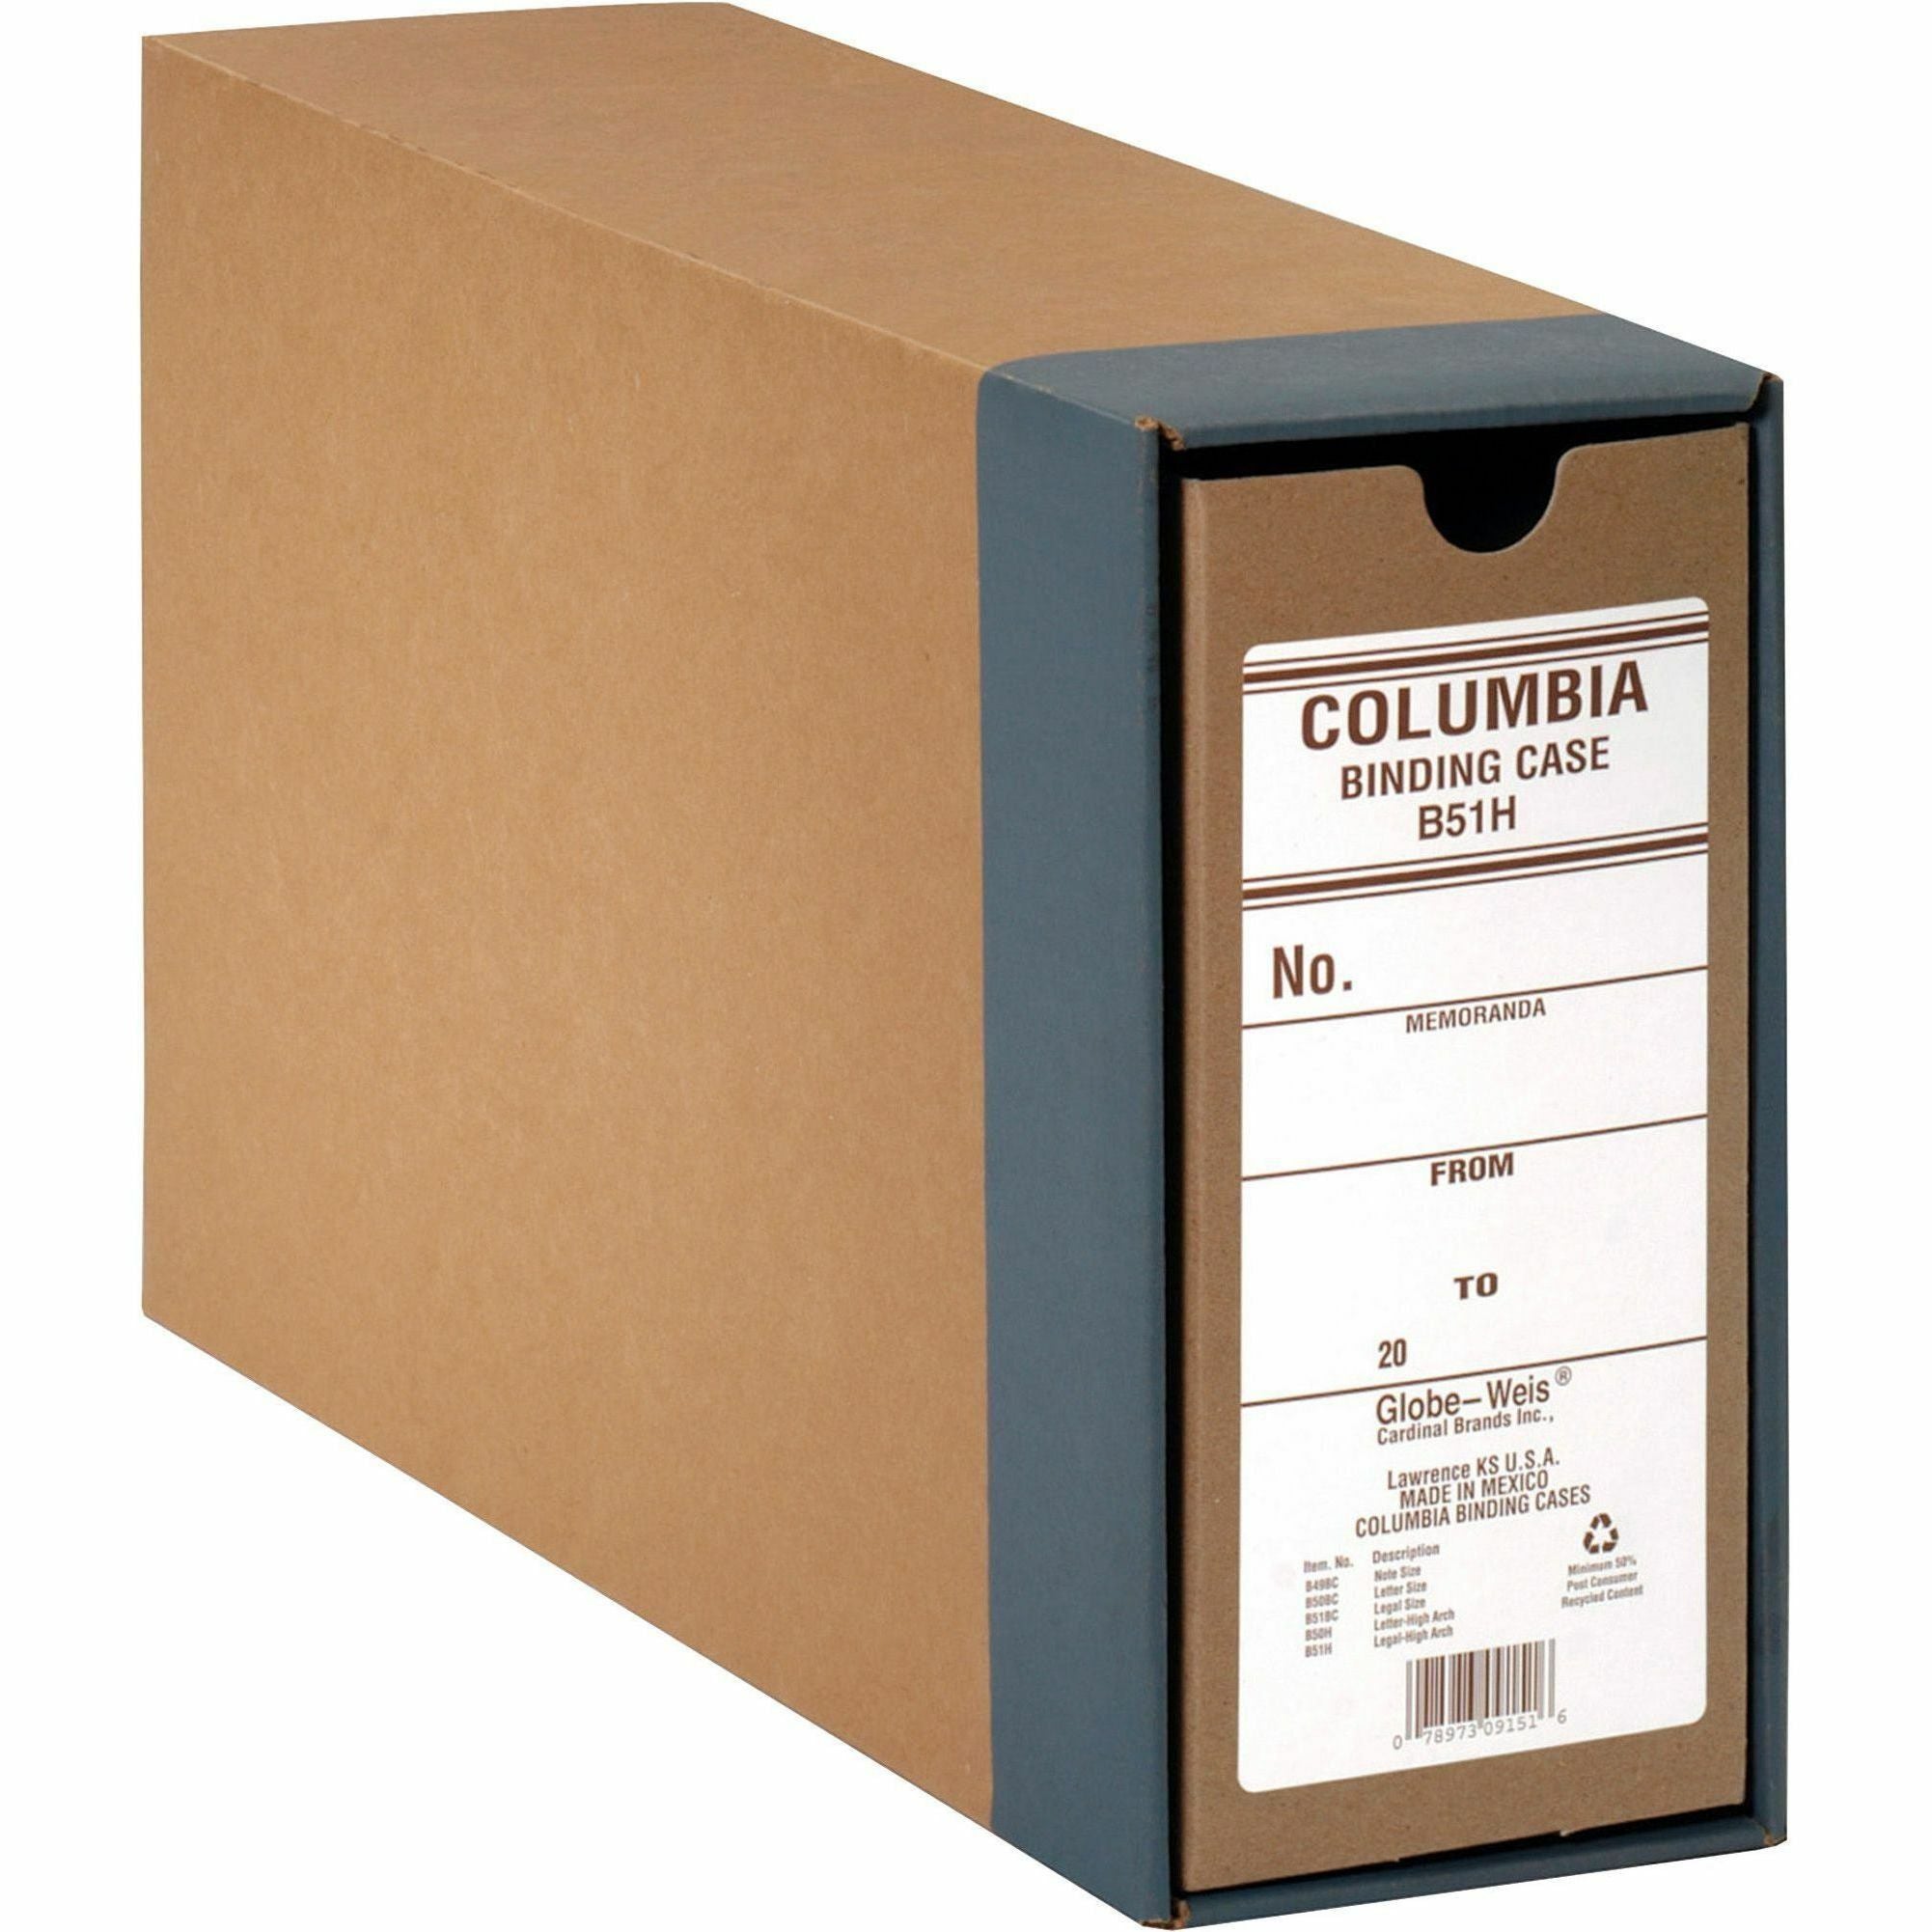 Pendaflex Columbia Binding Cases - External Dimensions: 9.5" Width x 15.9" Depth x 4.6"Height - Media Size Supported: Legal - Fiberboard, Kraft - Brown - For Document - Recycled - 1 Each - 